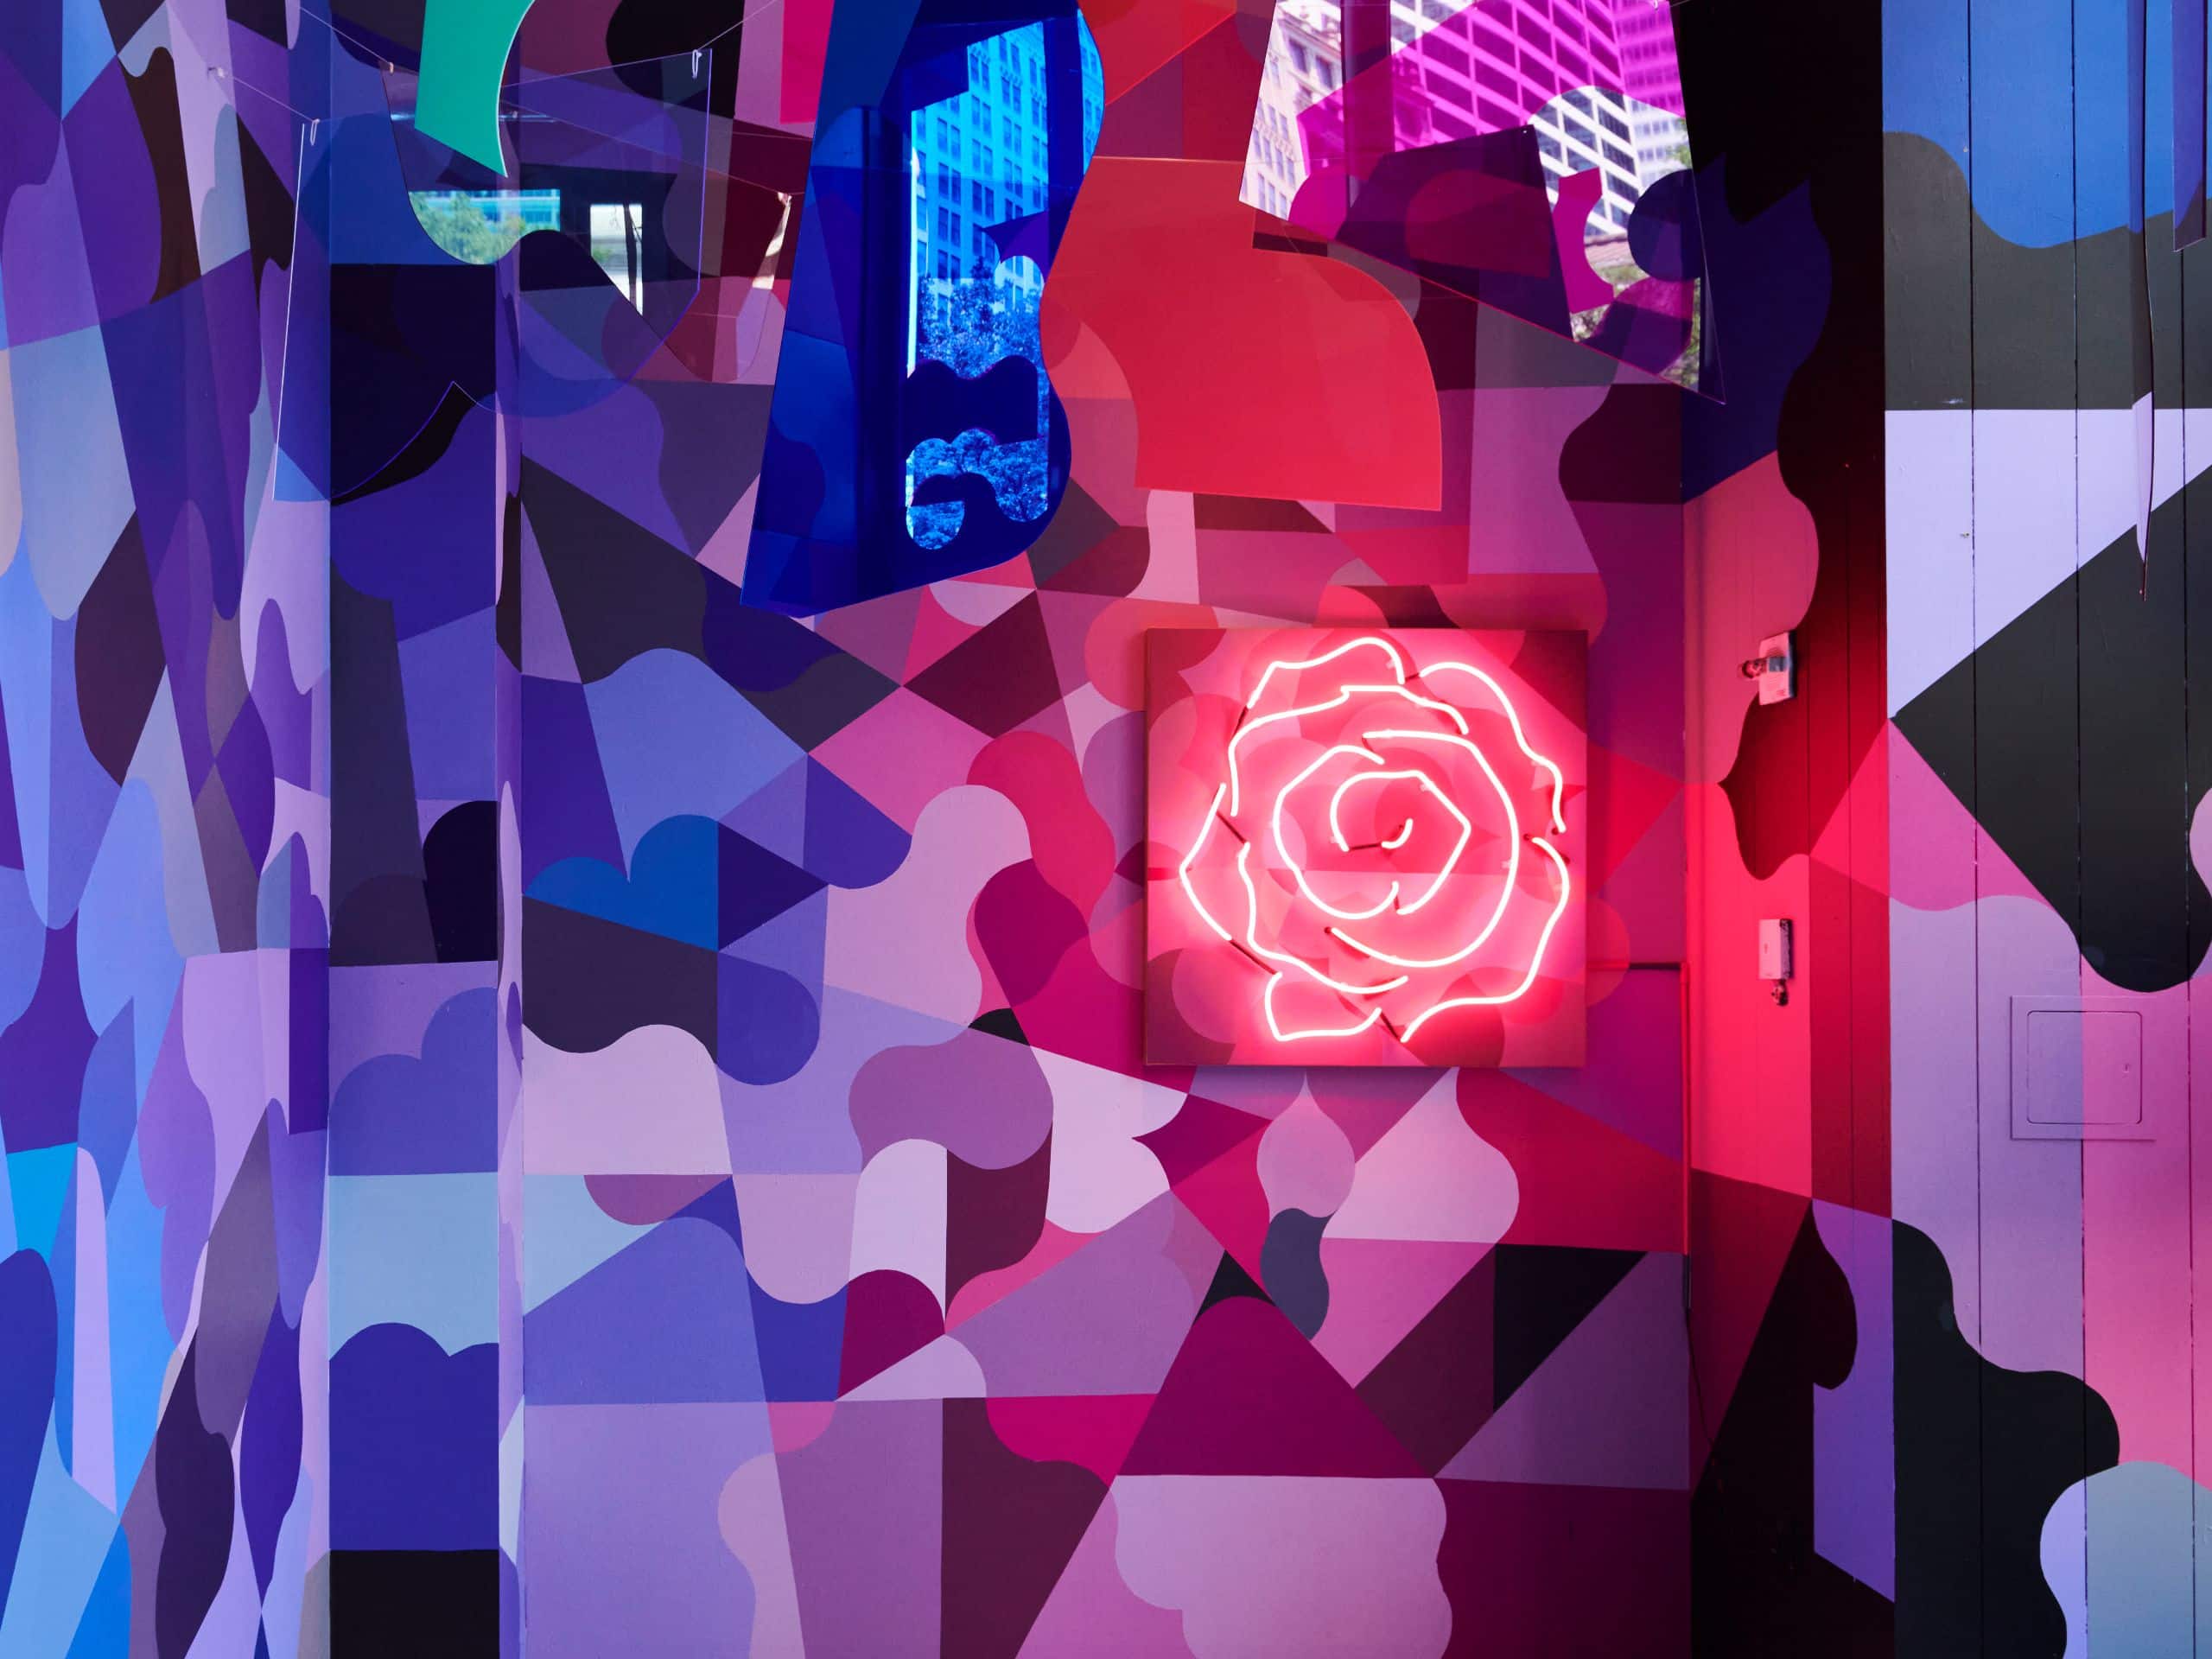 Andaz 5th Avenue Gallery Installation Rose